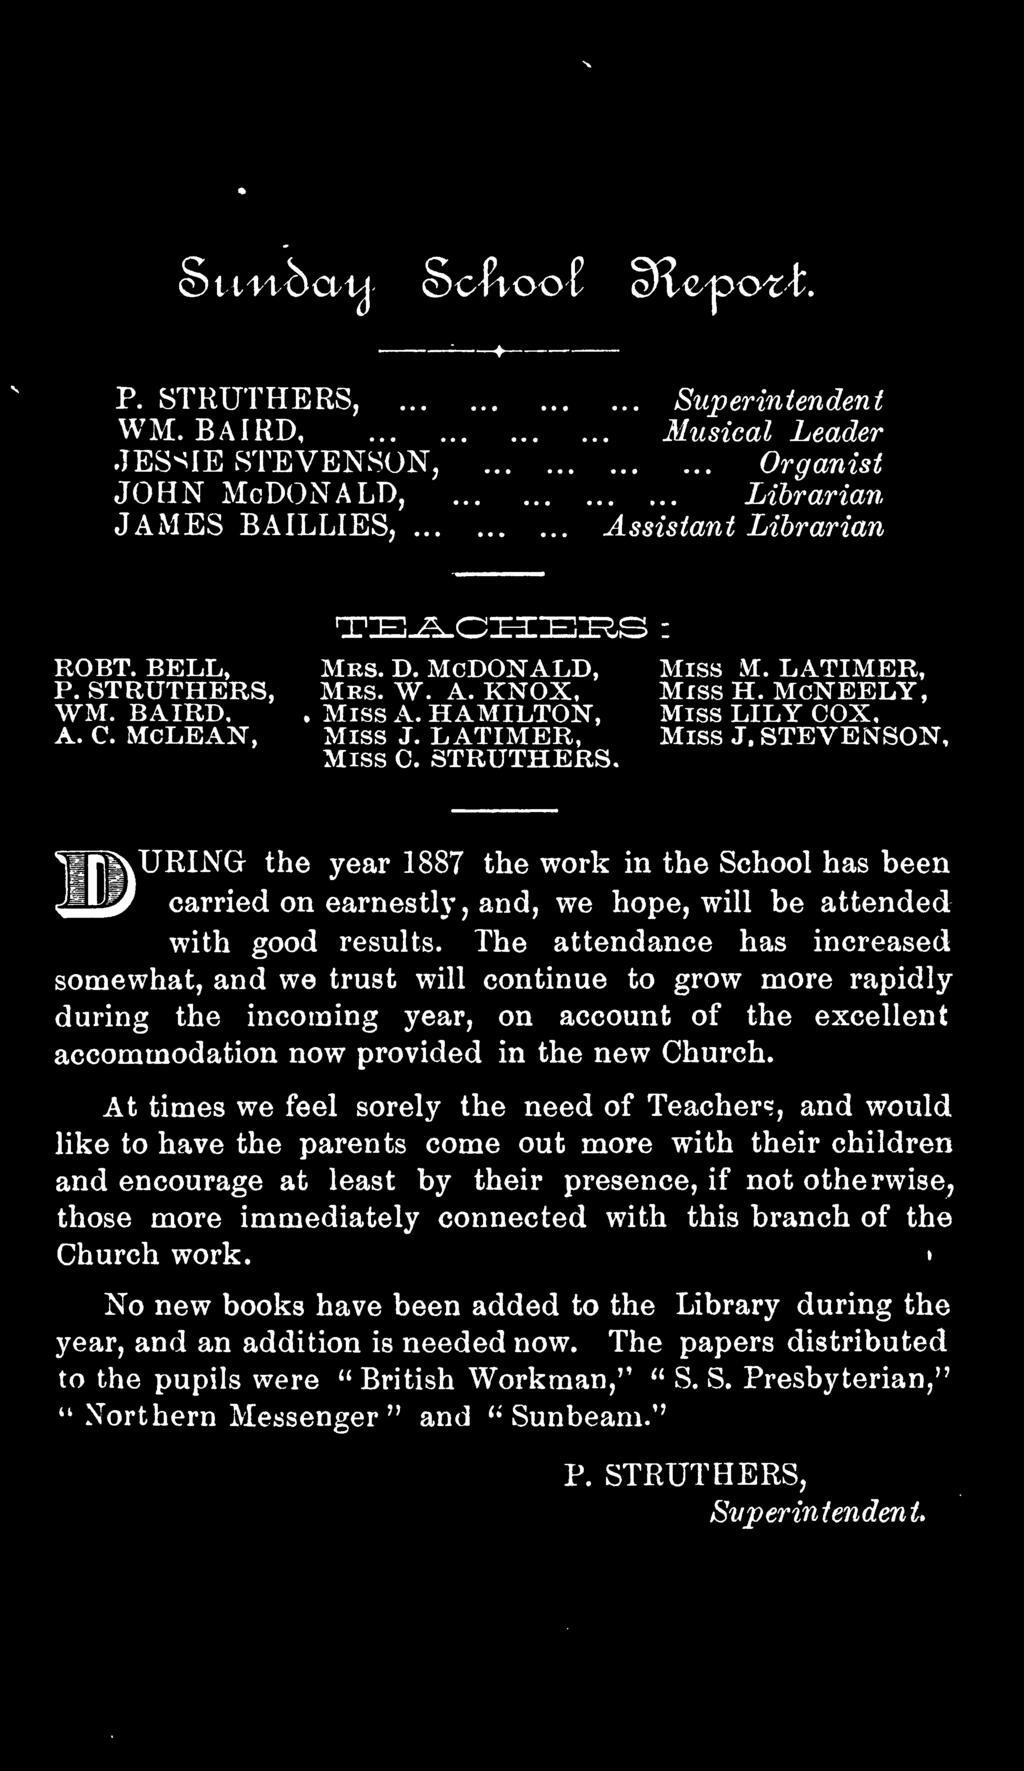 STEVENSON, BURINGr the year 1887 the work in the School has been carried on earnestly, and, we hope, will be attended with good results.